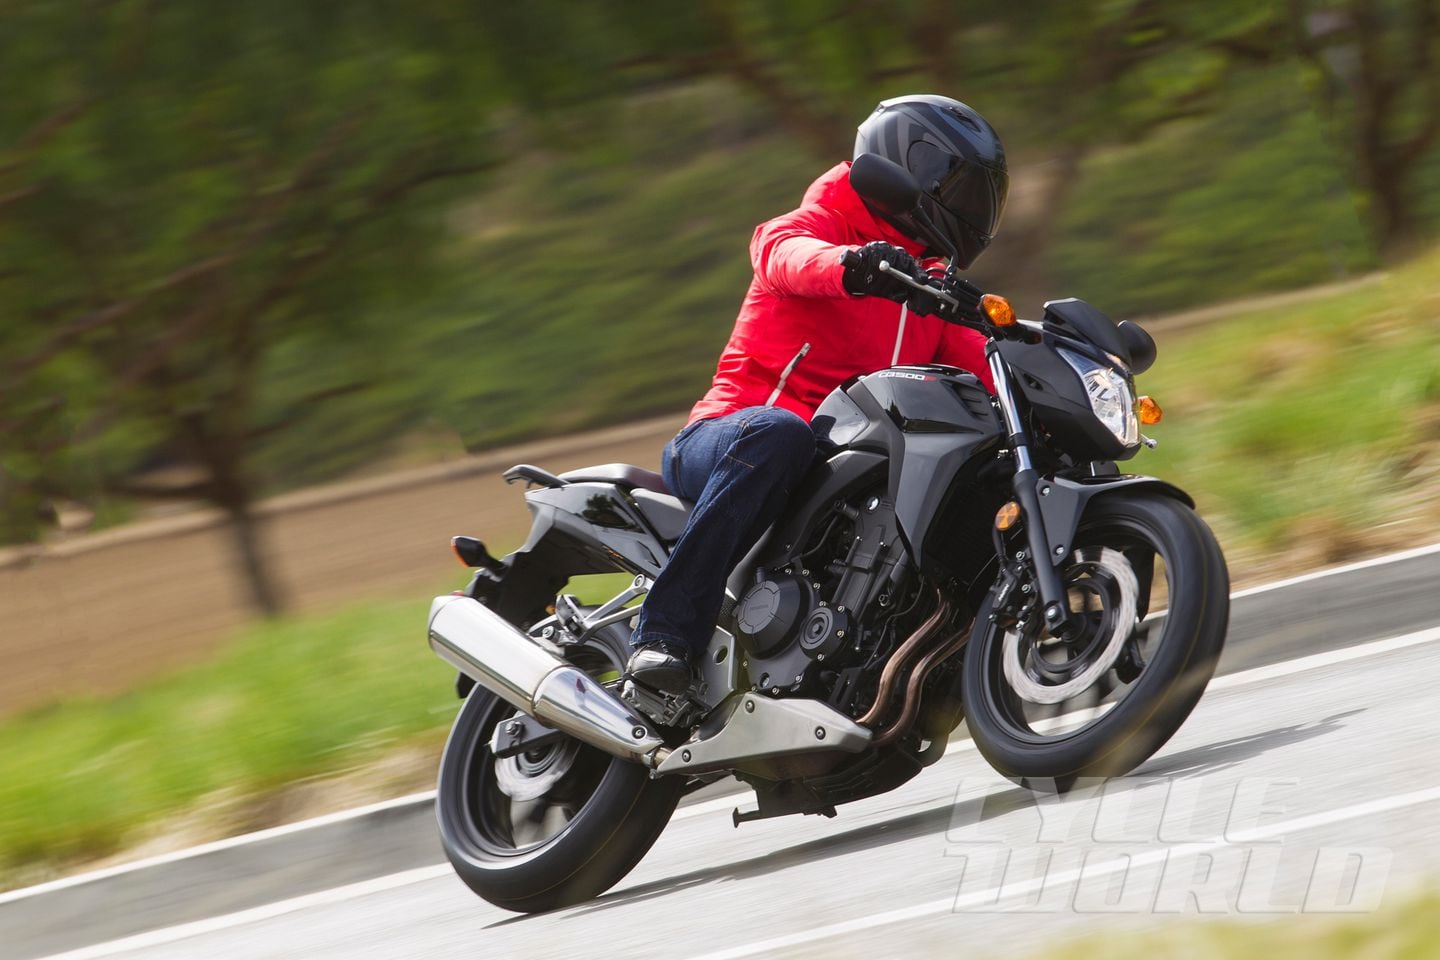 Honda Cb500f Riding Impression Naked Motorcycle Review Photos Specs Cycle World 2350